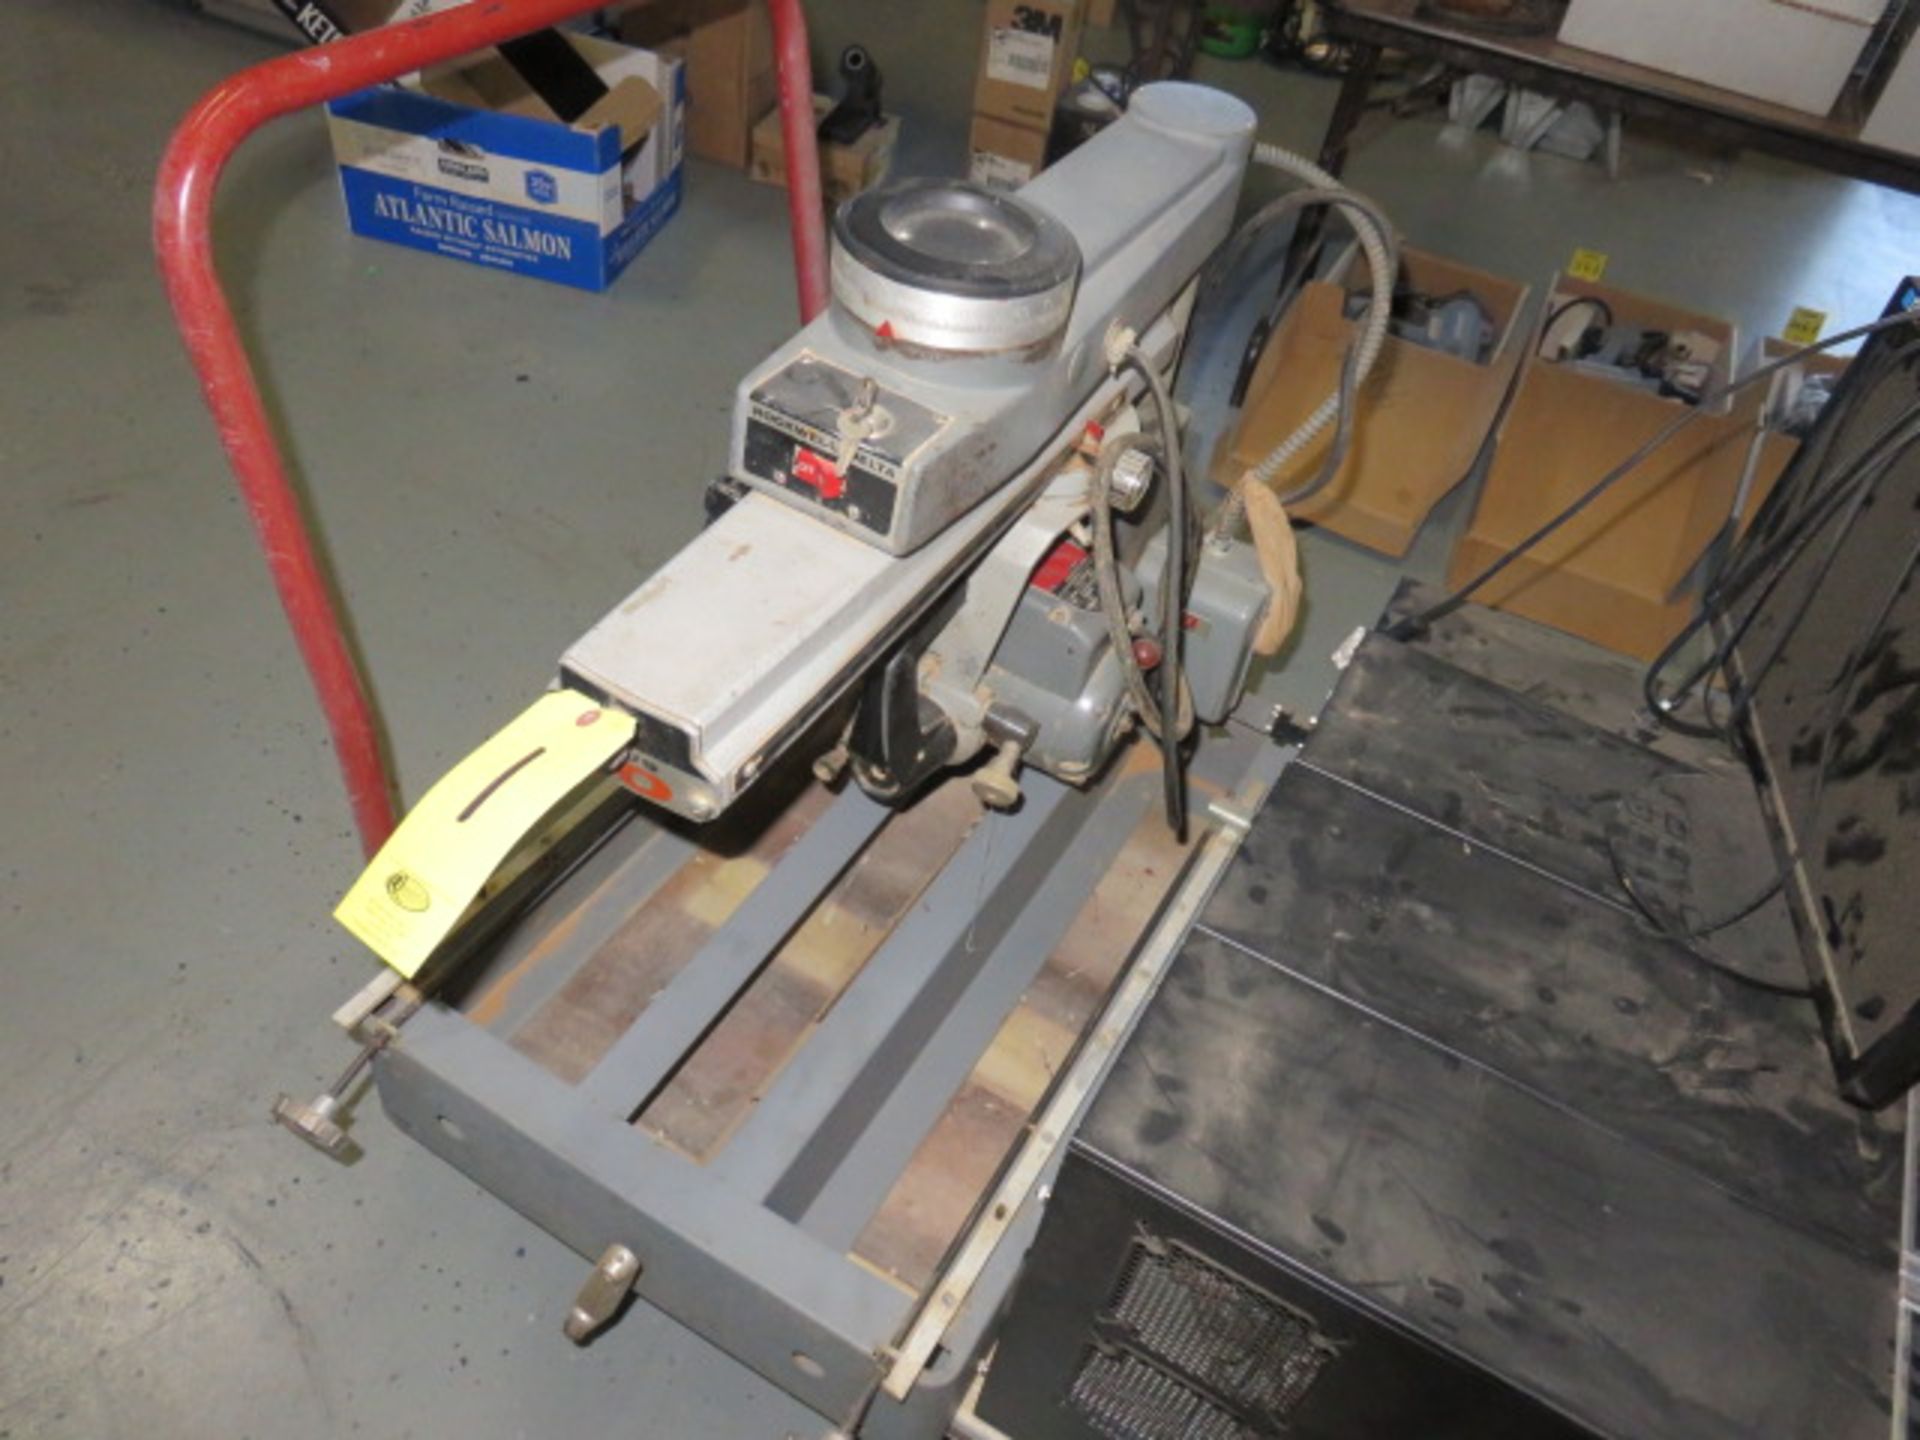 DELTA ROCKWELL 33-694 RADIAL ARM SAW, S/N D01880, 2 HP - Image 2 of 2